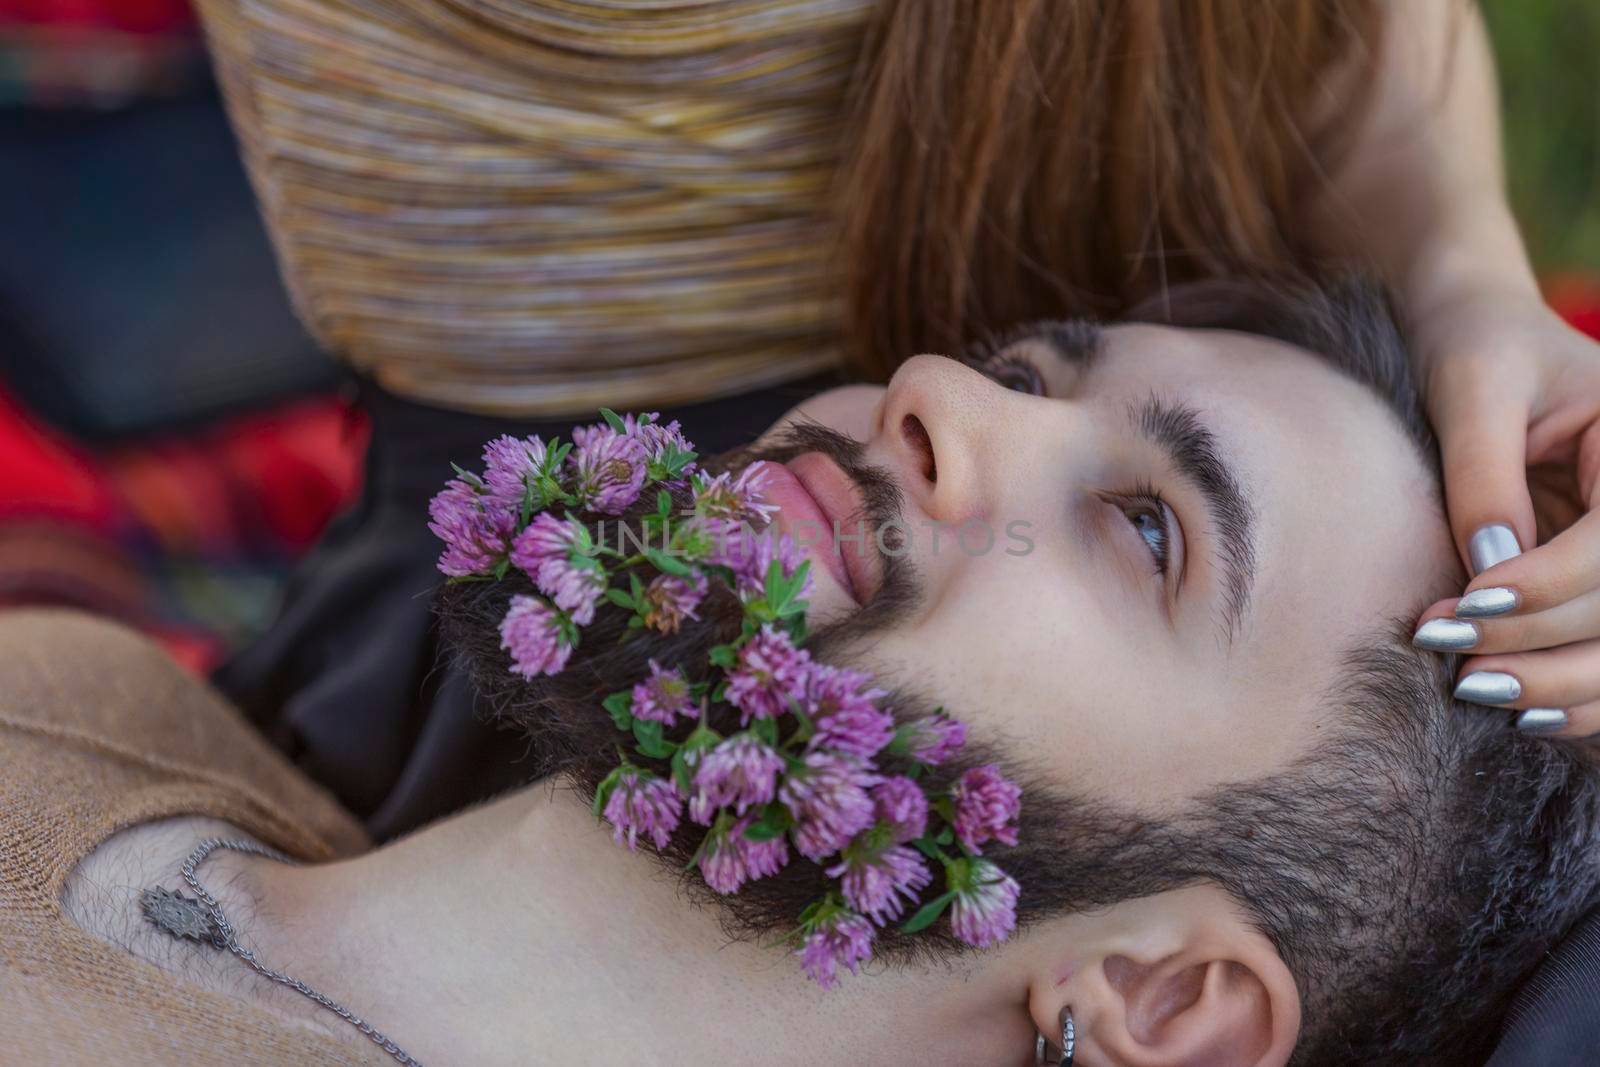 man with flowers in his beard